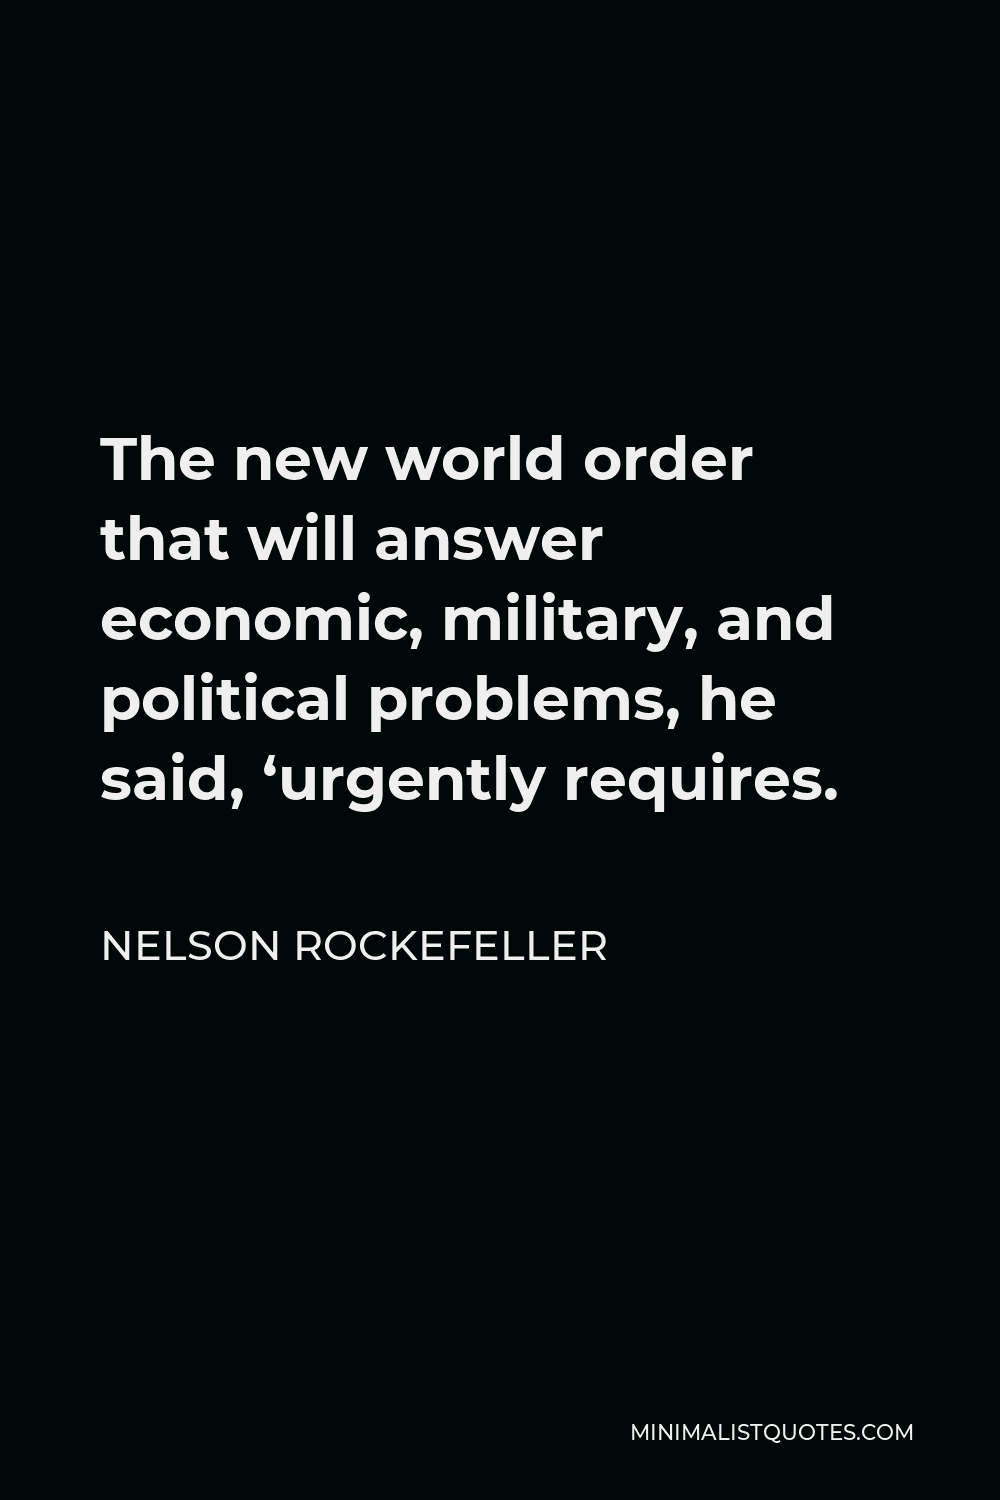 Nelson Rockefeller Quote - The new world order that will answer economic, military, and political problems, he said, ‘urgently requires.